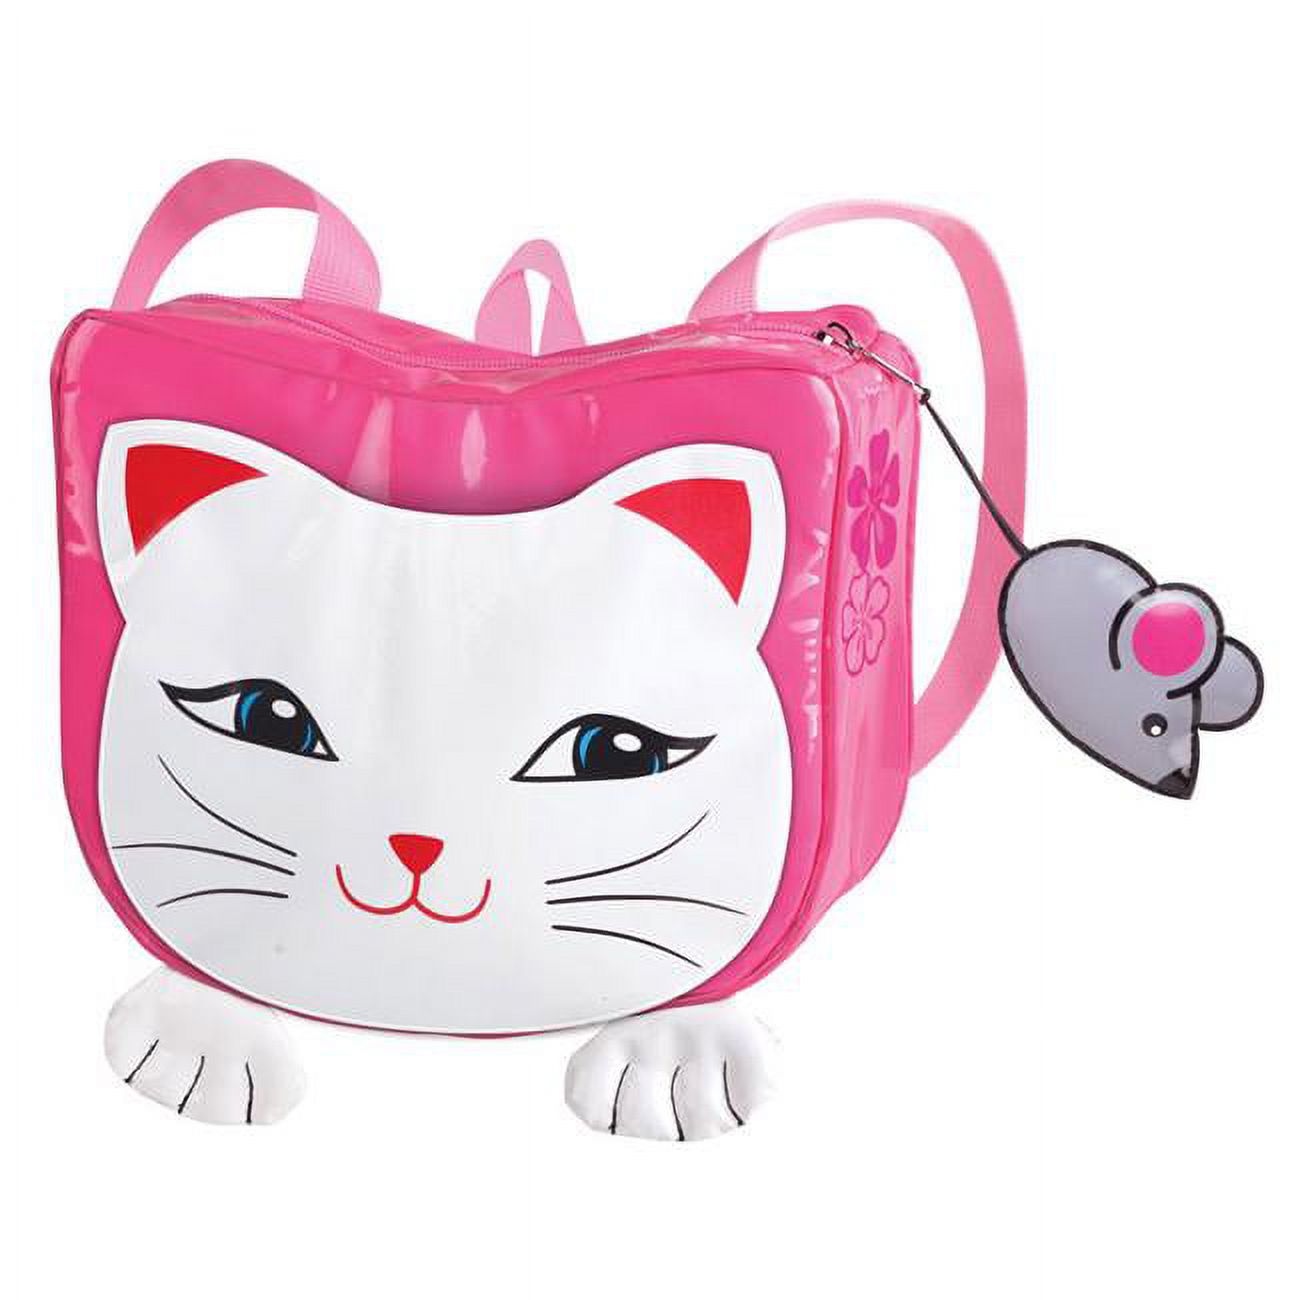 Kidorable Kidorable lucky cat backpack Lucky Cat Backpack - Pink - image 1 of 2